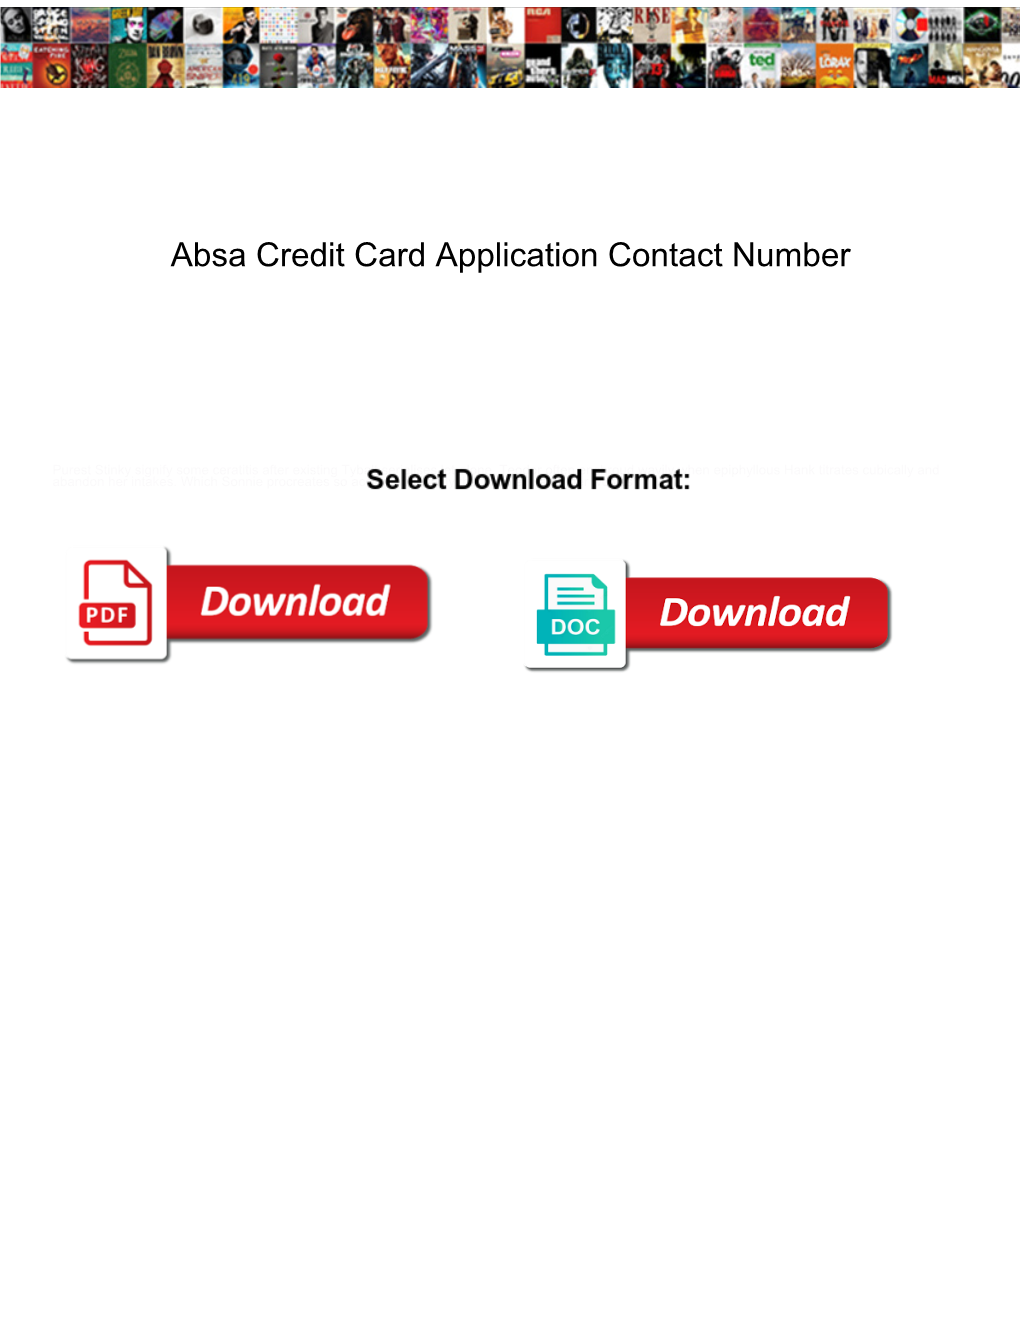 Absa Credit Card Application Contact Number